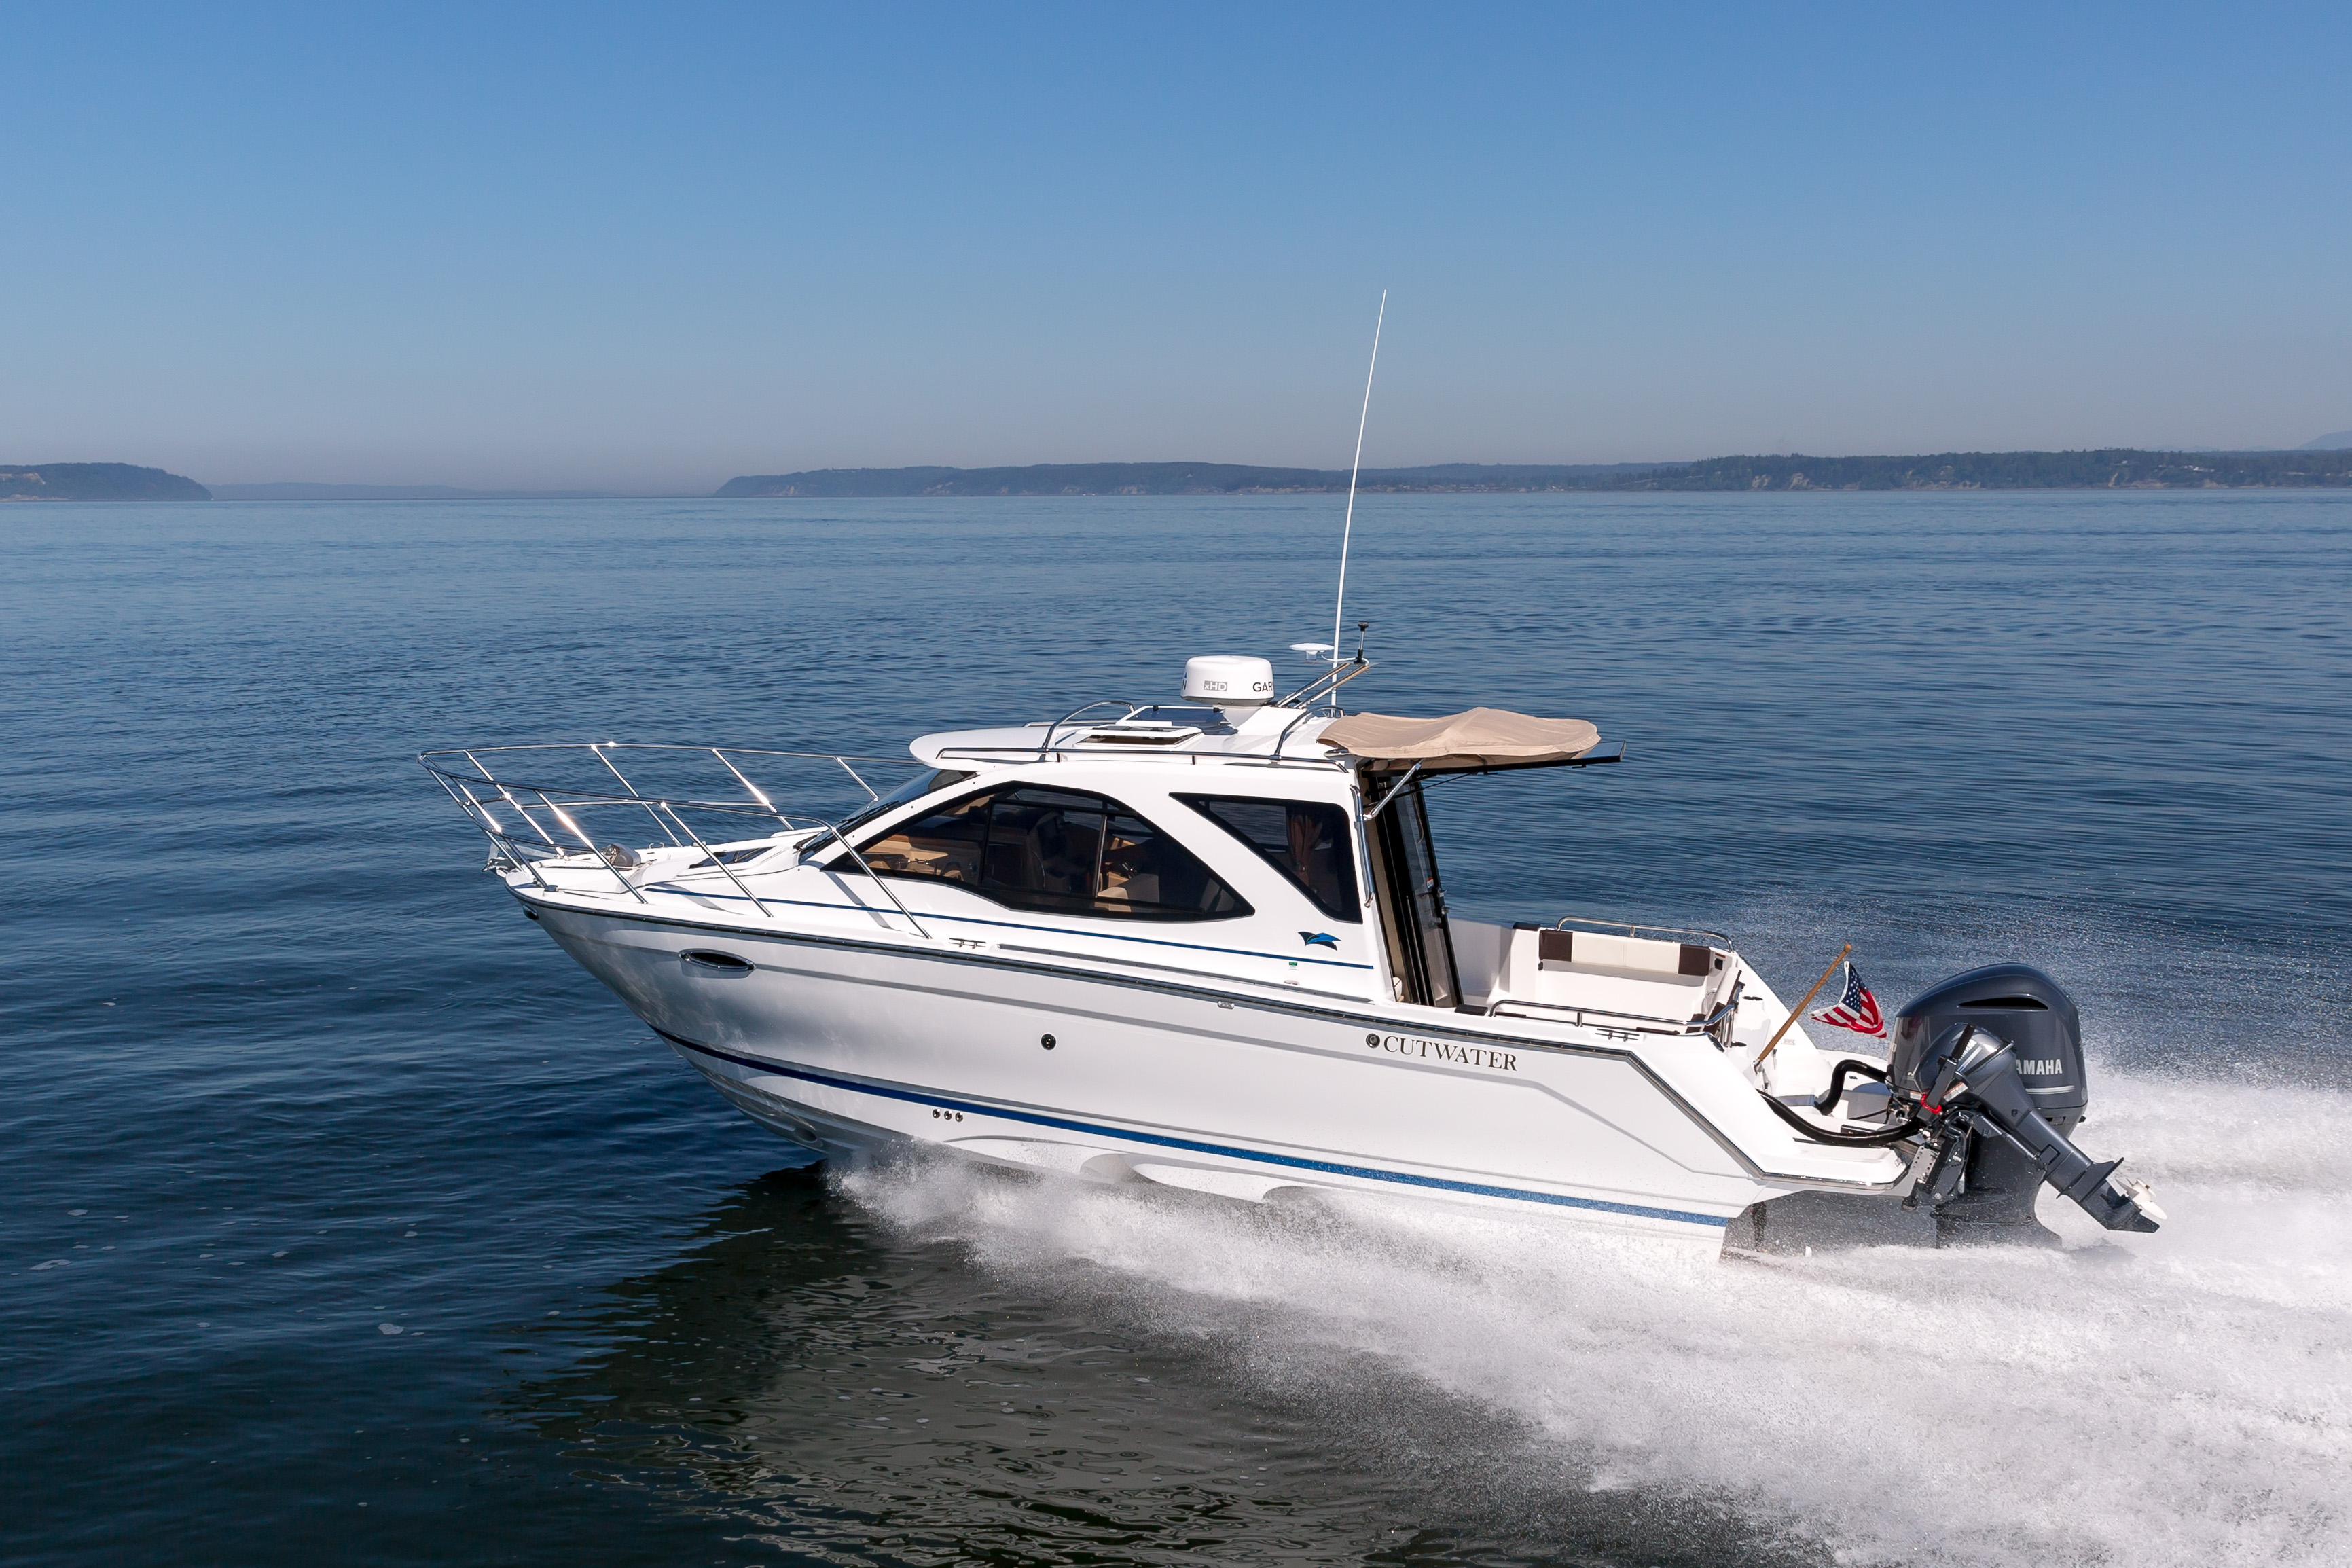 Cutwater Boats produces four models from 24’ to 30’ in length, each a contemporary interpretation of the classic downeast style. Each Cutwater Boat is built by hand in Washington State. All Cutwater B